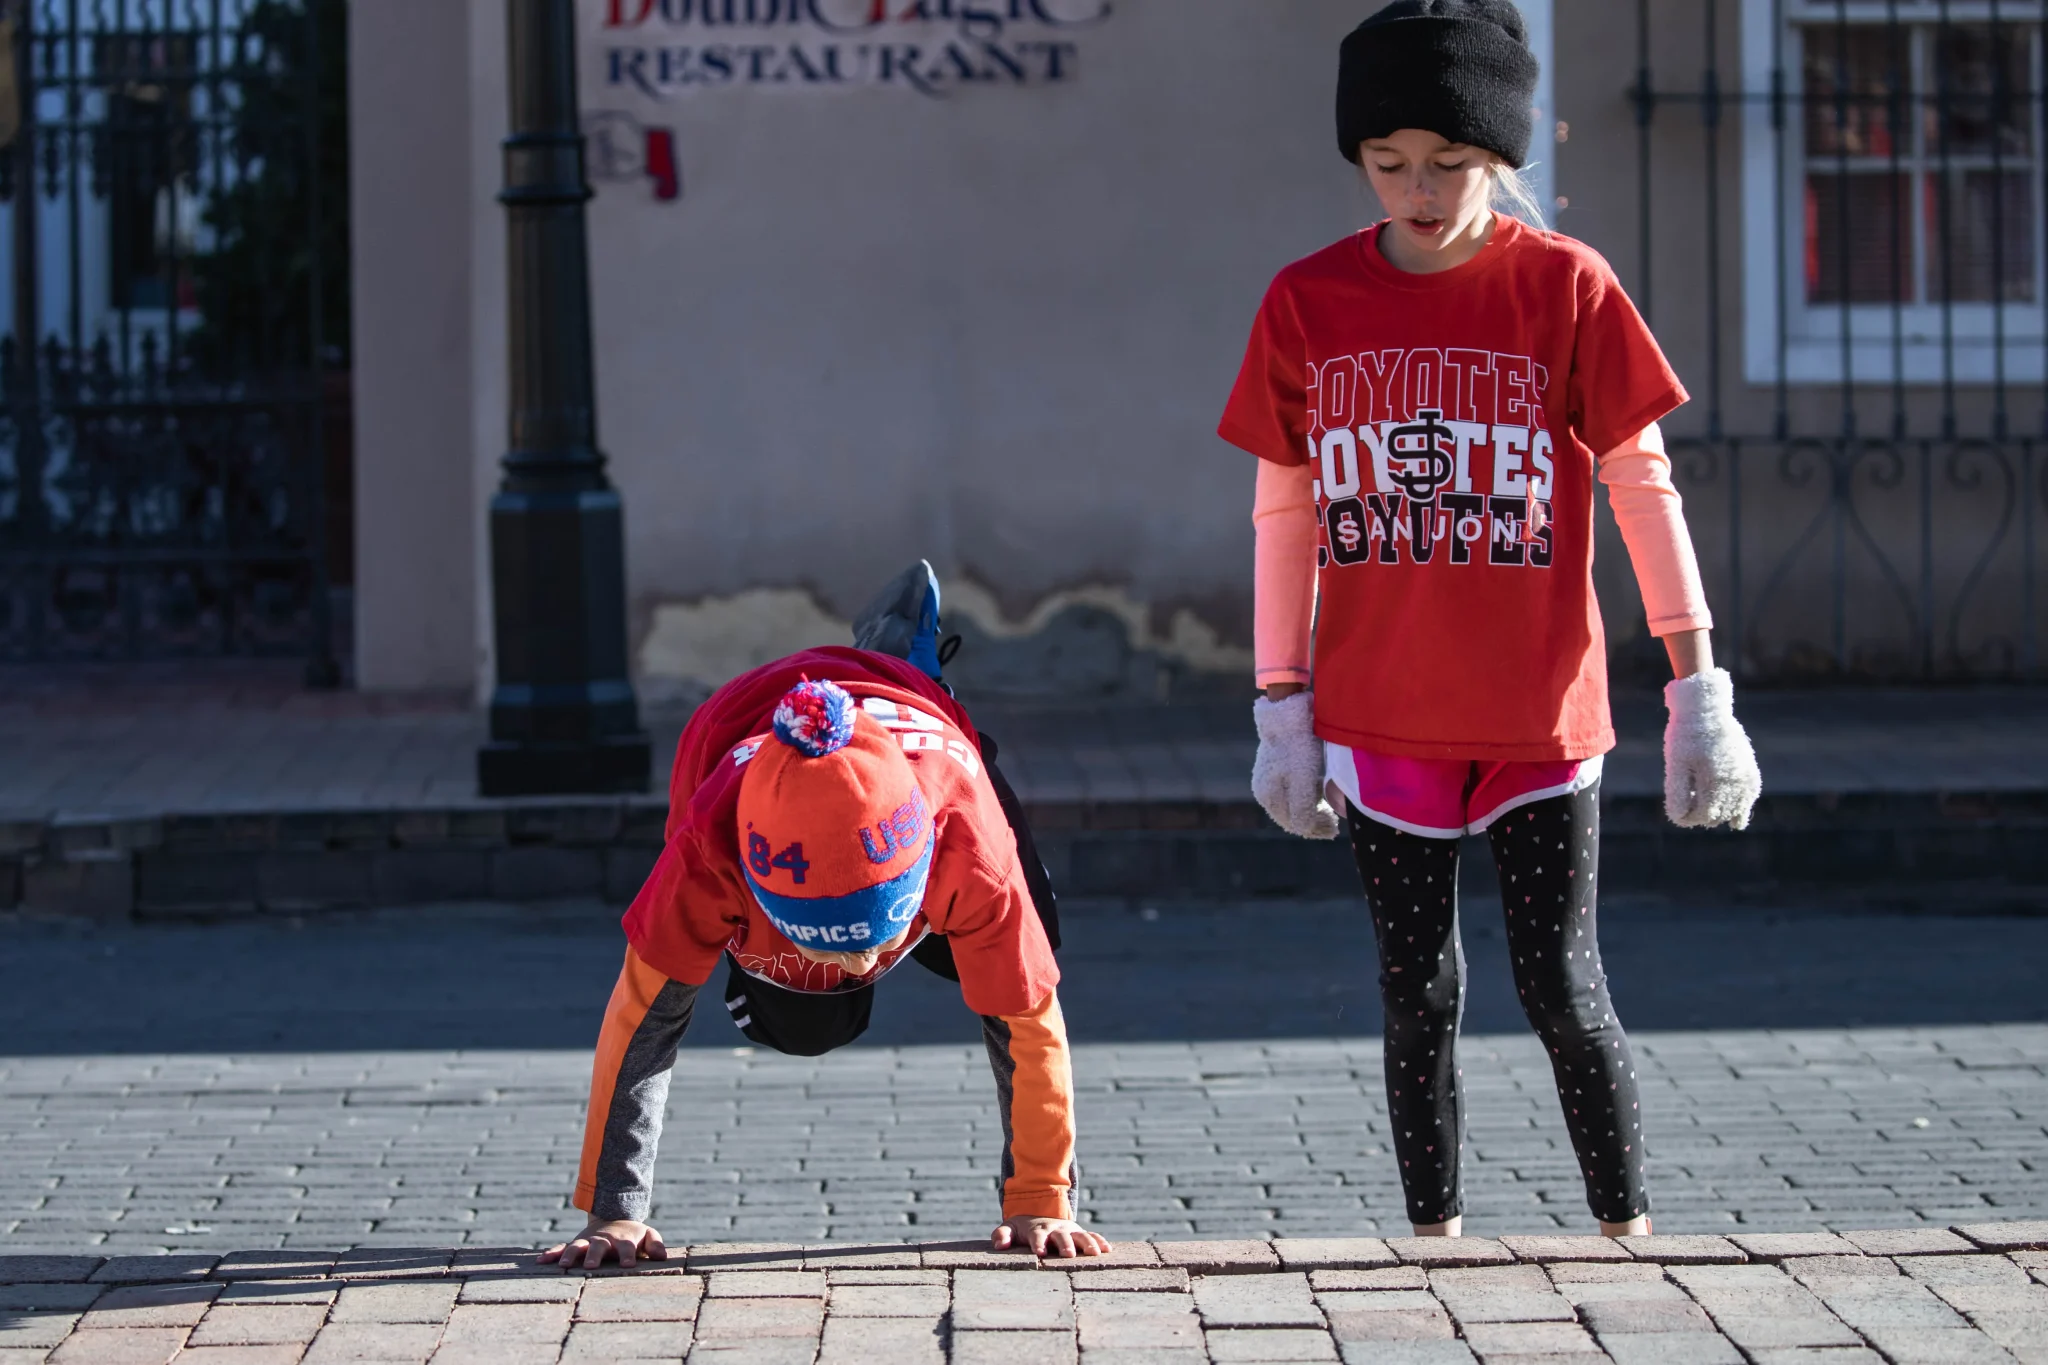 Kaycee and Cooper Younker get ready to run the Cupid's Chase 5K in Mesilla on Saturday, Feb. 12, 2022. Nathan J Fish/Sun-News - lcsun-news.com